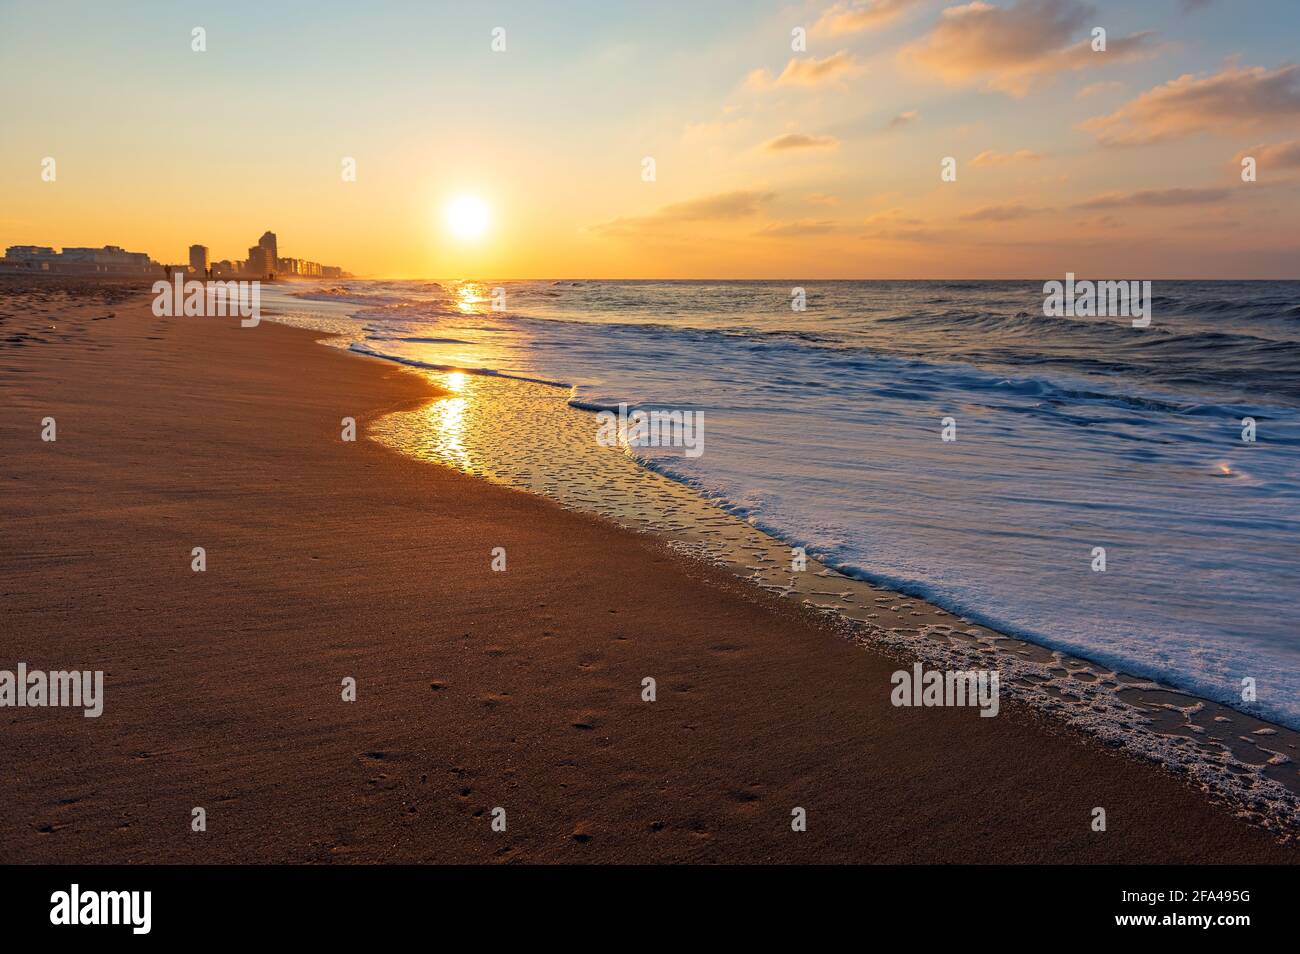 Oostende (Ostend) North Sea beach at sunset, Flanders, Belgium. Stock Photo